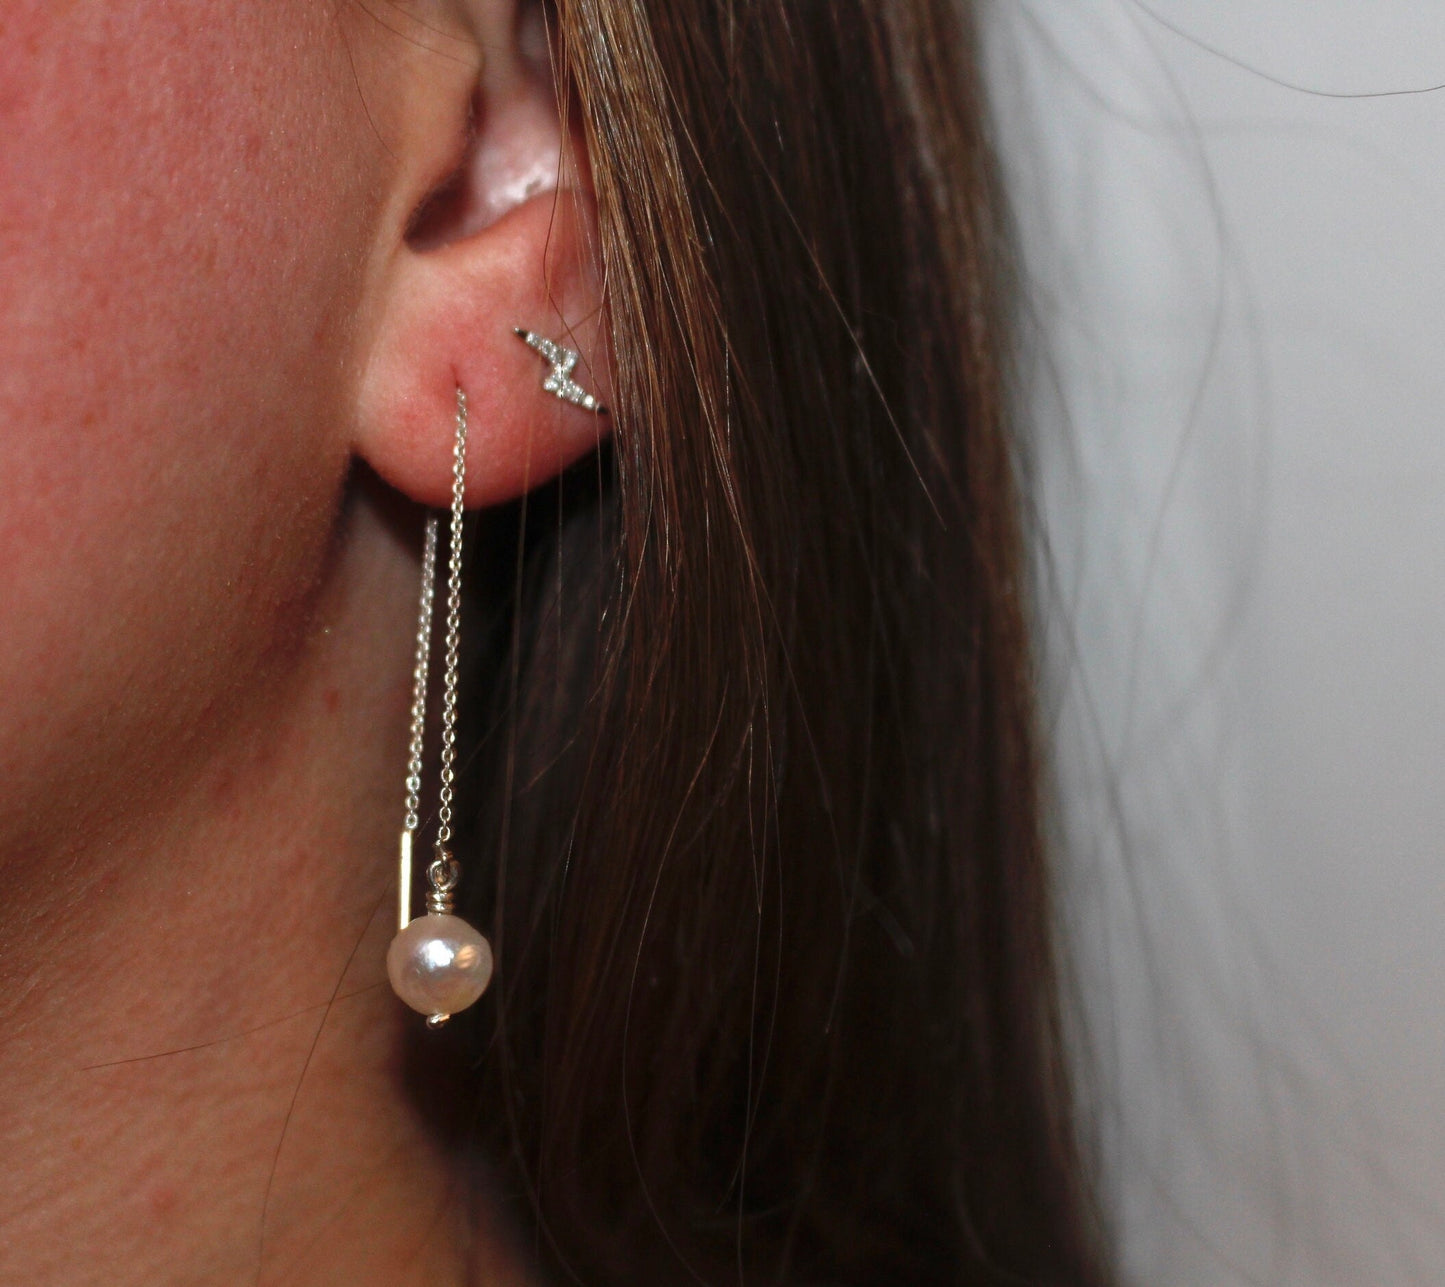 Pearl Drop Threader Earrings Available in Sterling Silver and 14K Gold-Fill